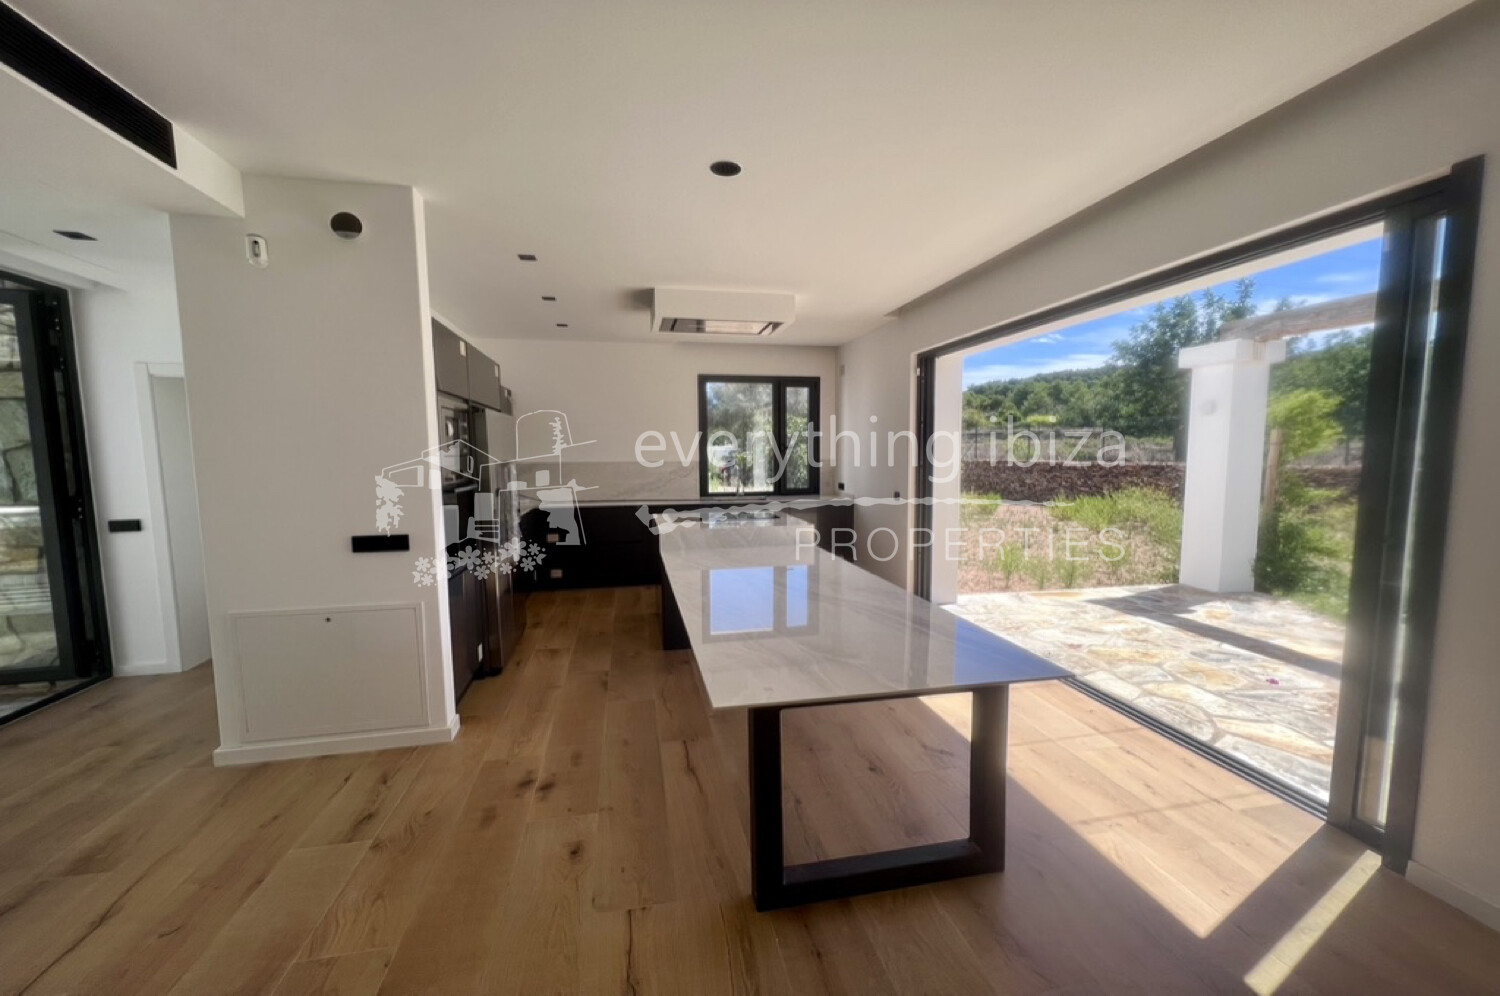 Super Modern New Build Villa Close to Sant Rafael Village, ref. 1625, for sale in Ibiza by everything ibiza Properties